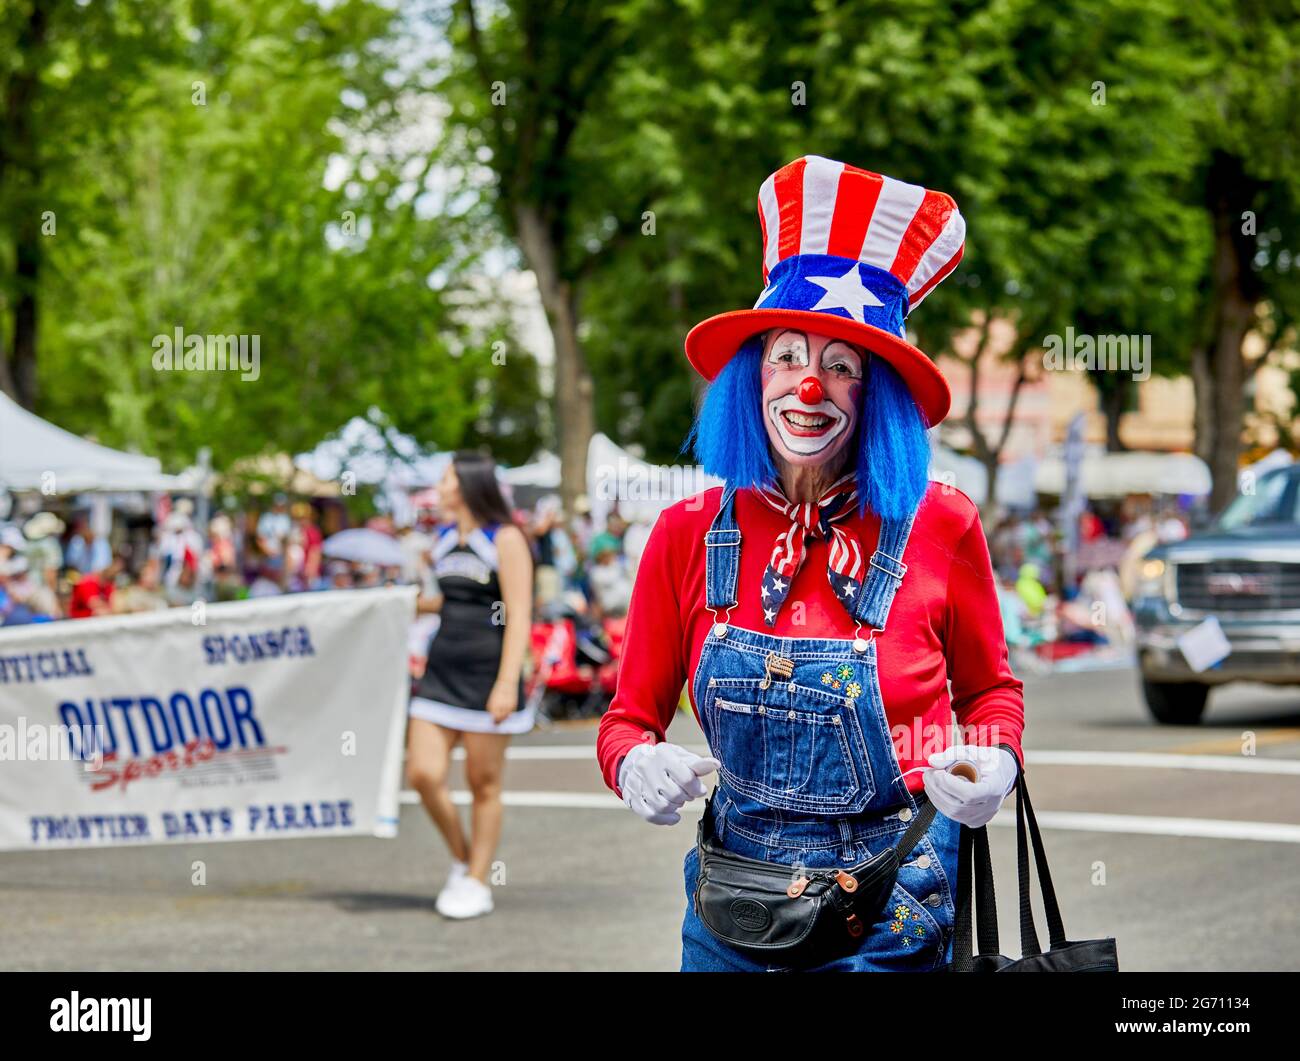 Prescott, Arizona, USA - July 3, 2021: Woman dressed in clown costume while marching in the 4th of July parade Stock Photo